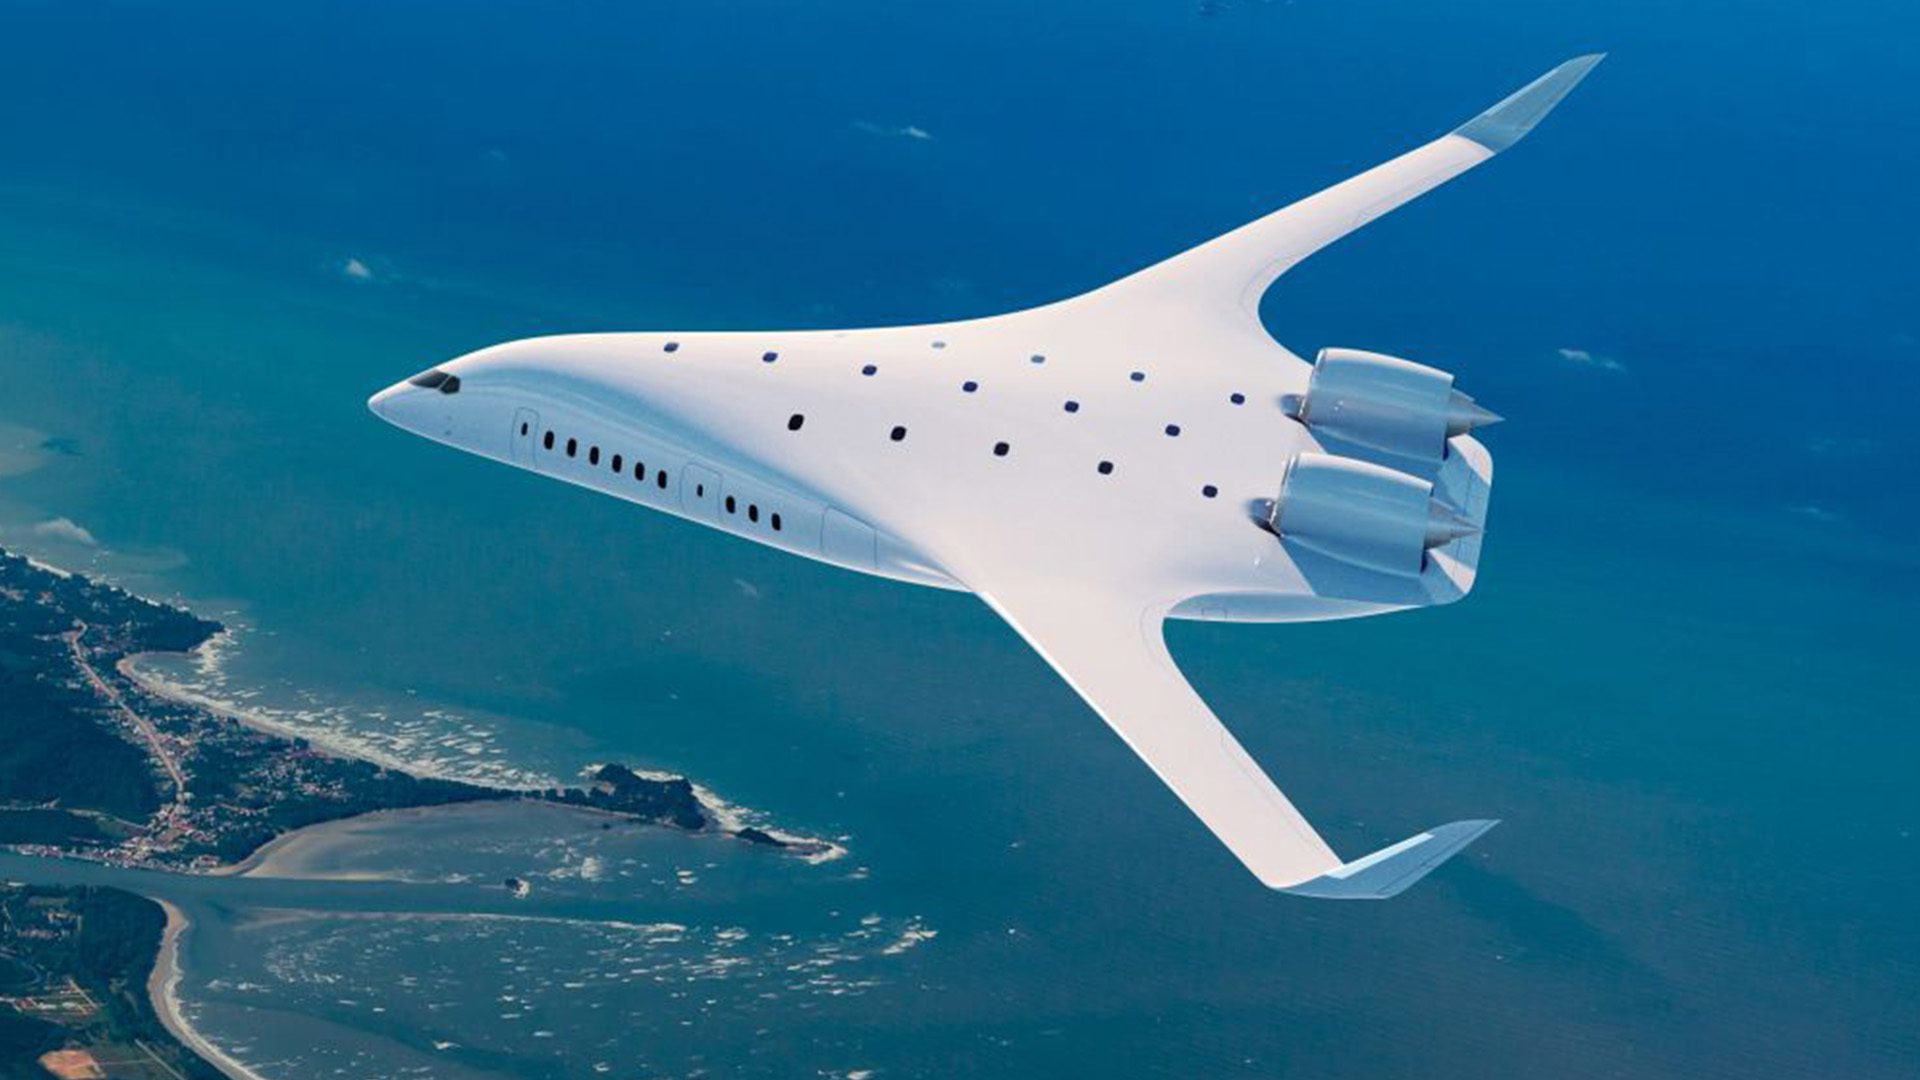 JetZero Blended Wing Aircraft Could Slash Carbon Emissions